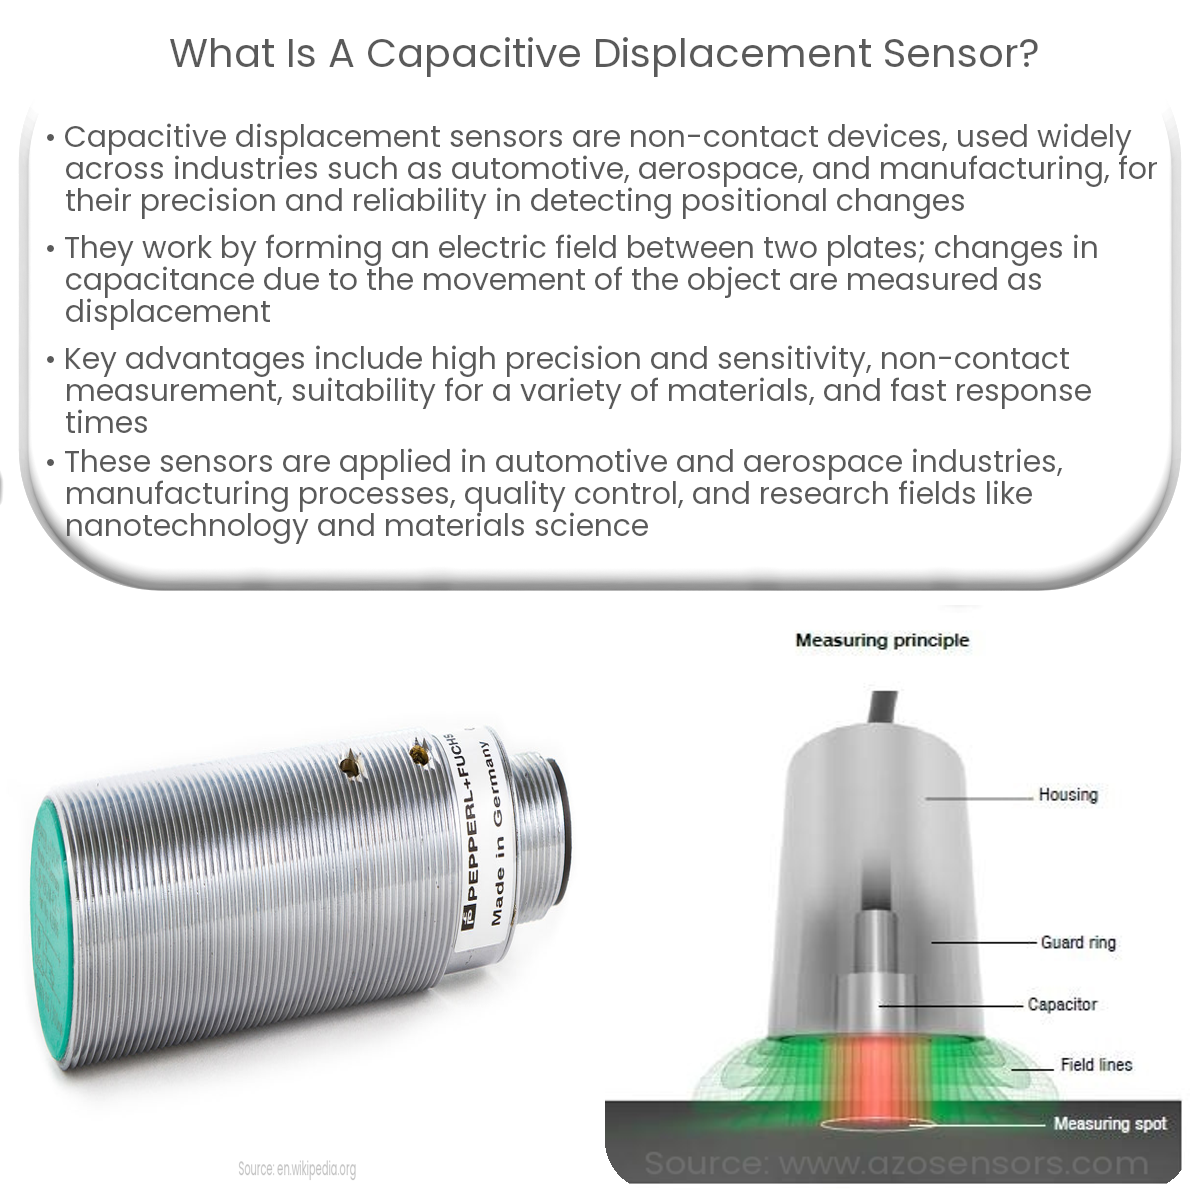 What is a capacitive displacement sensor?